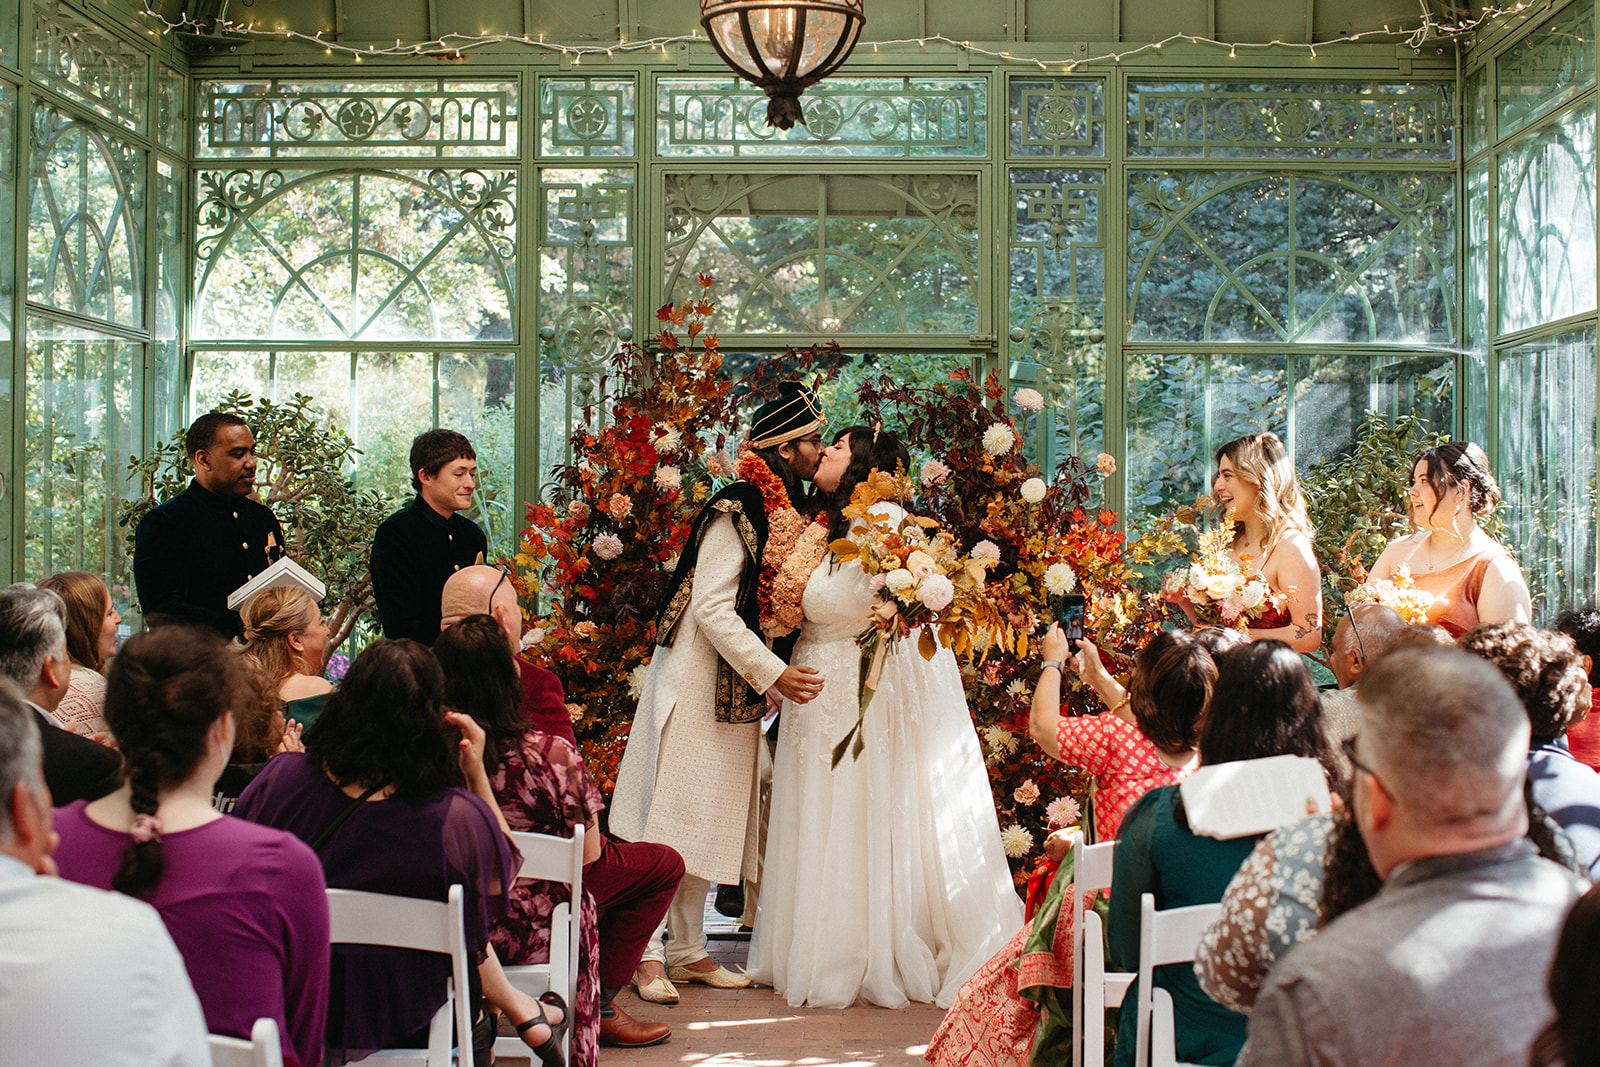 Should You Have An Indoor or Outdoor Wedding?